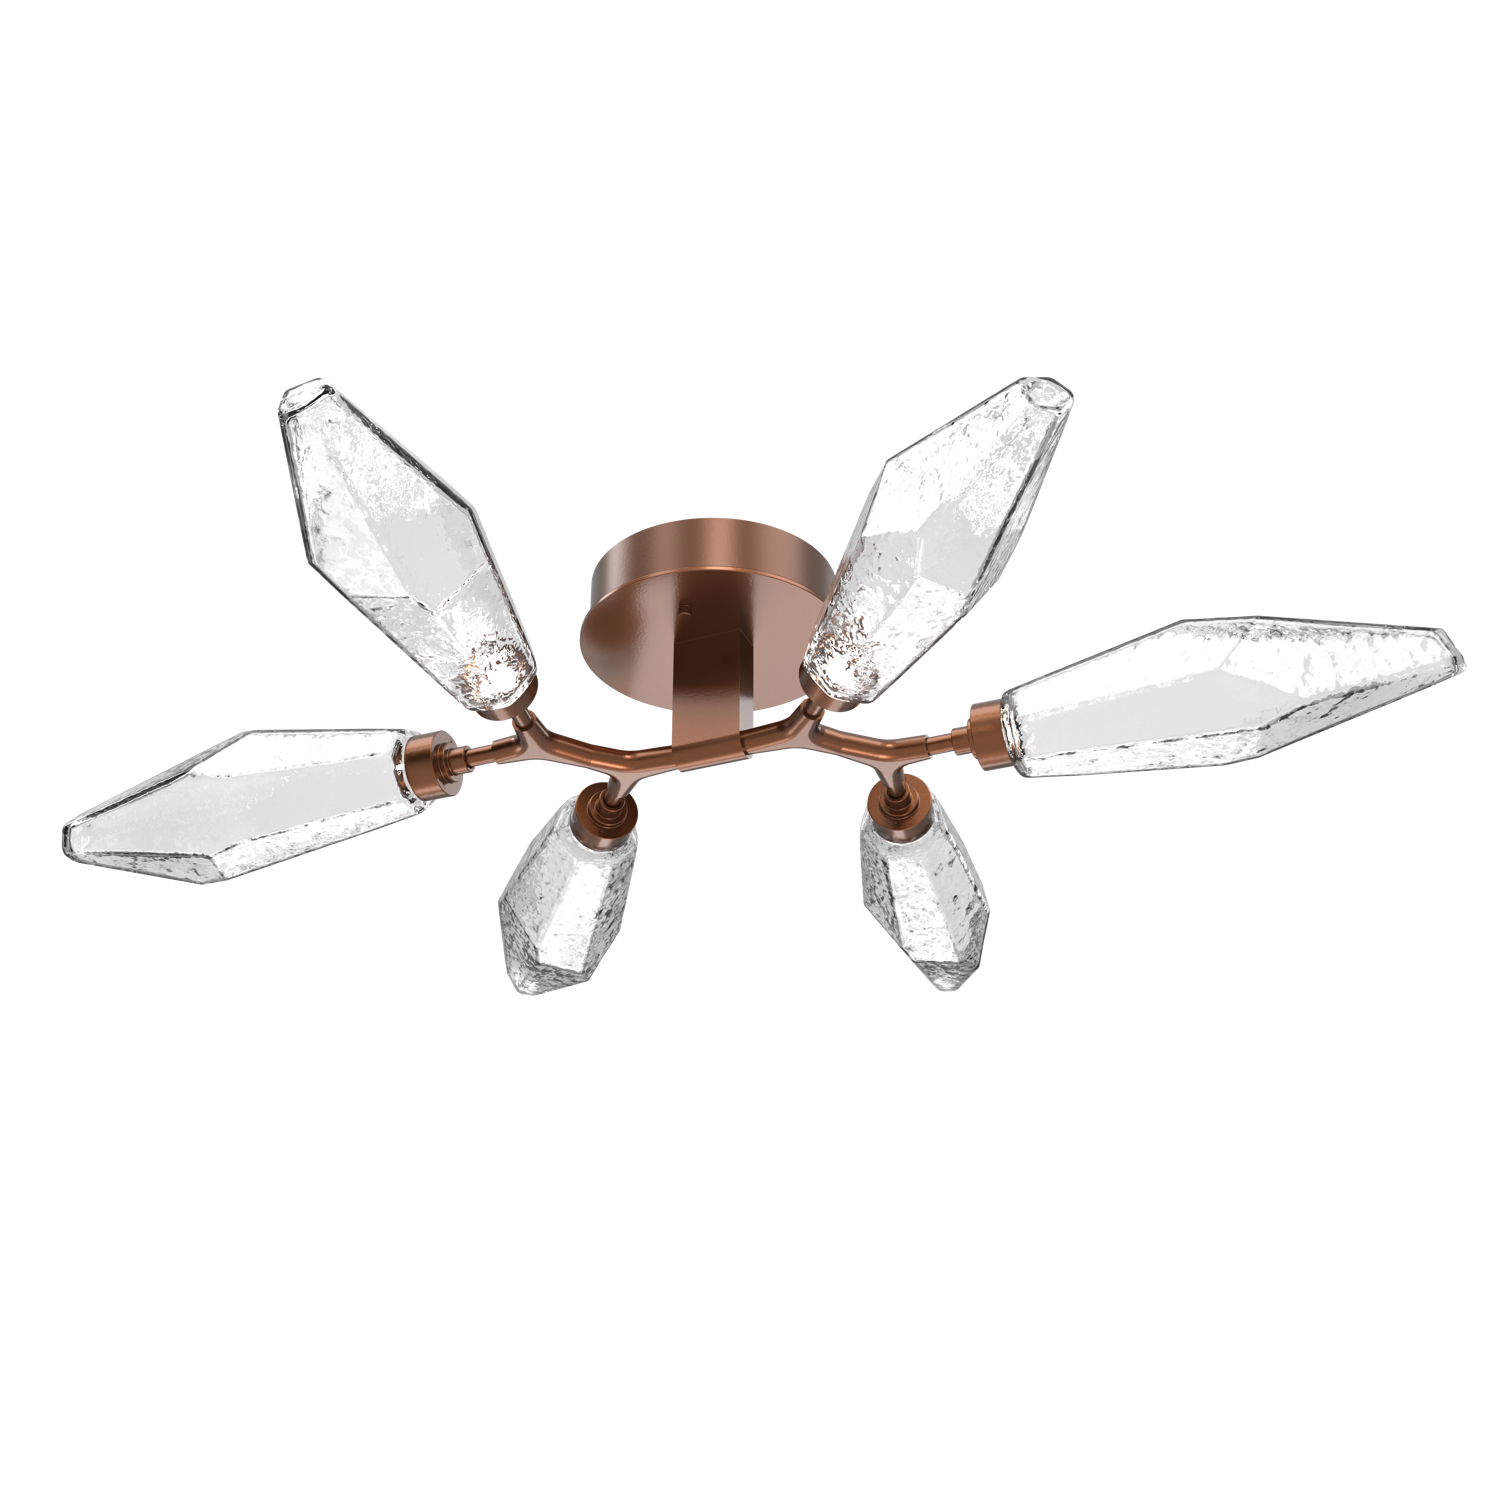 CLB0050-01-BB-CC-Hammerton-Studio-Rock-Crystal-flush-mount-light-with-burnished-bronze-finish-and-clear-glass-shades-and-LED-lamping